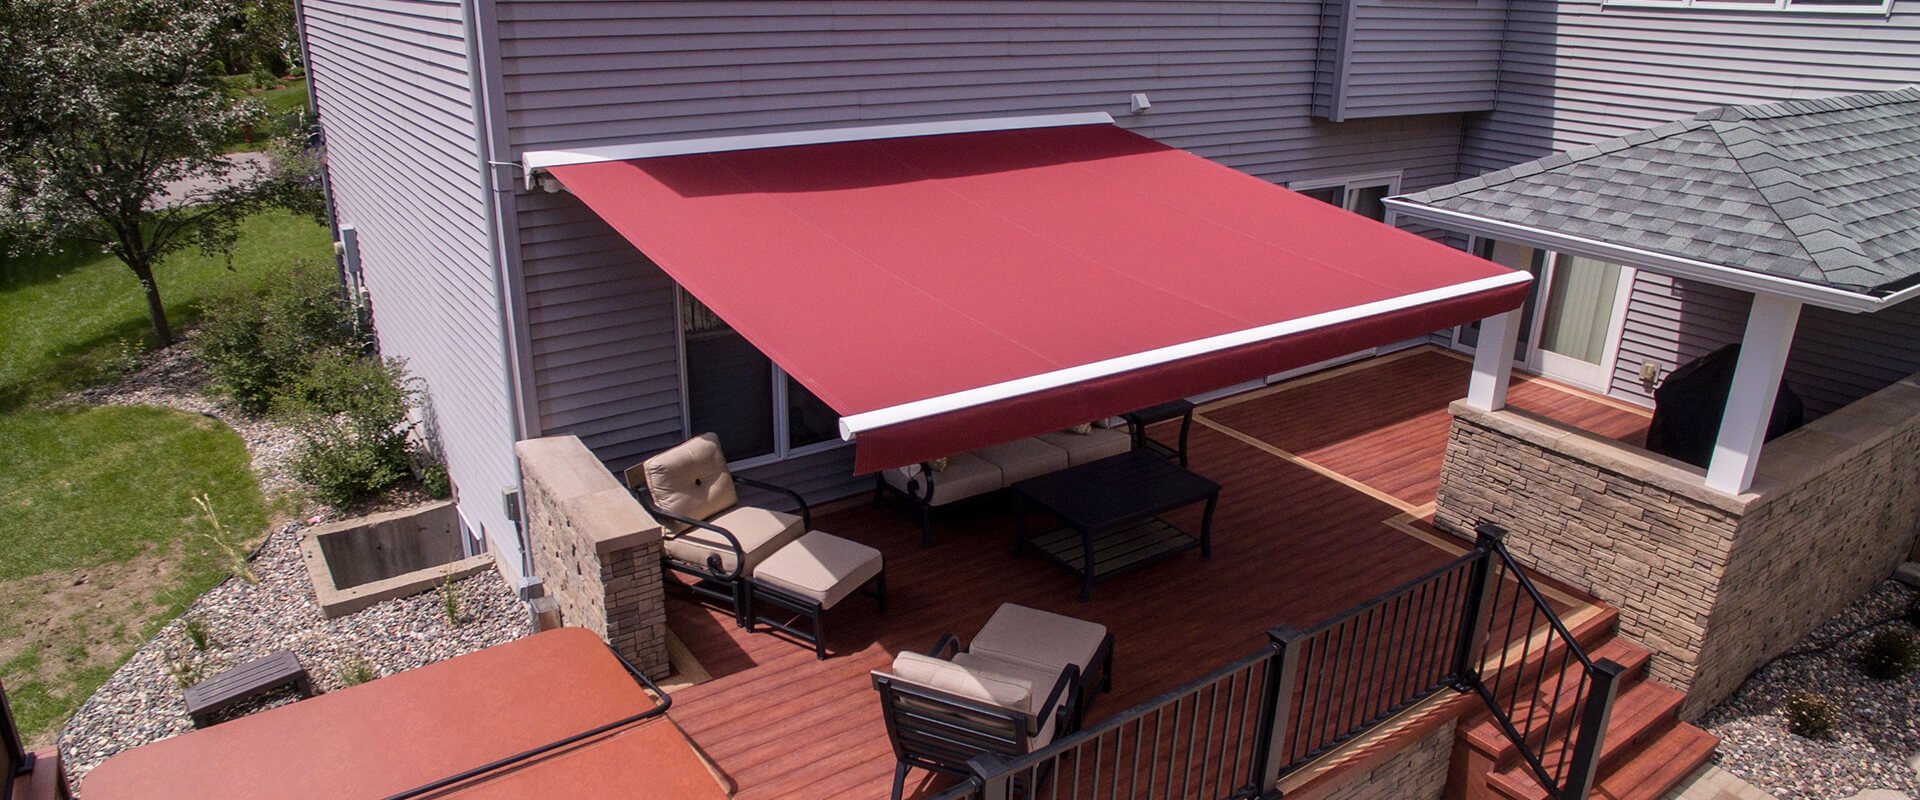 Awning Fabrics Can Be Eco-Friendly